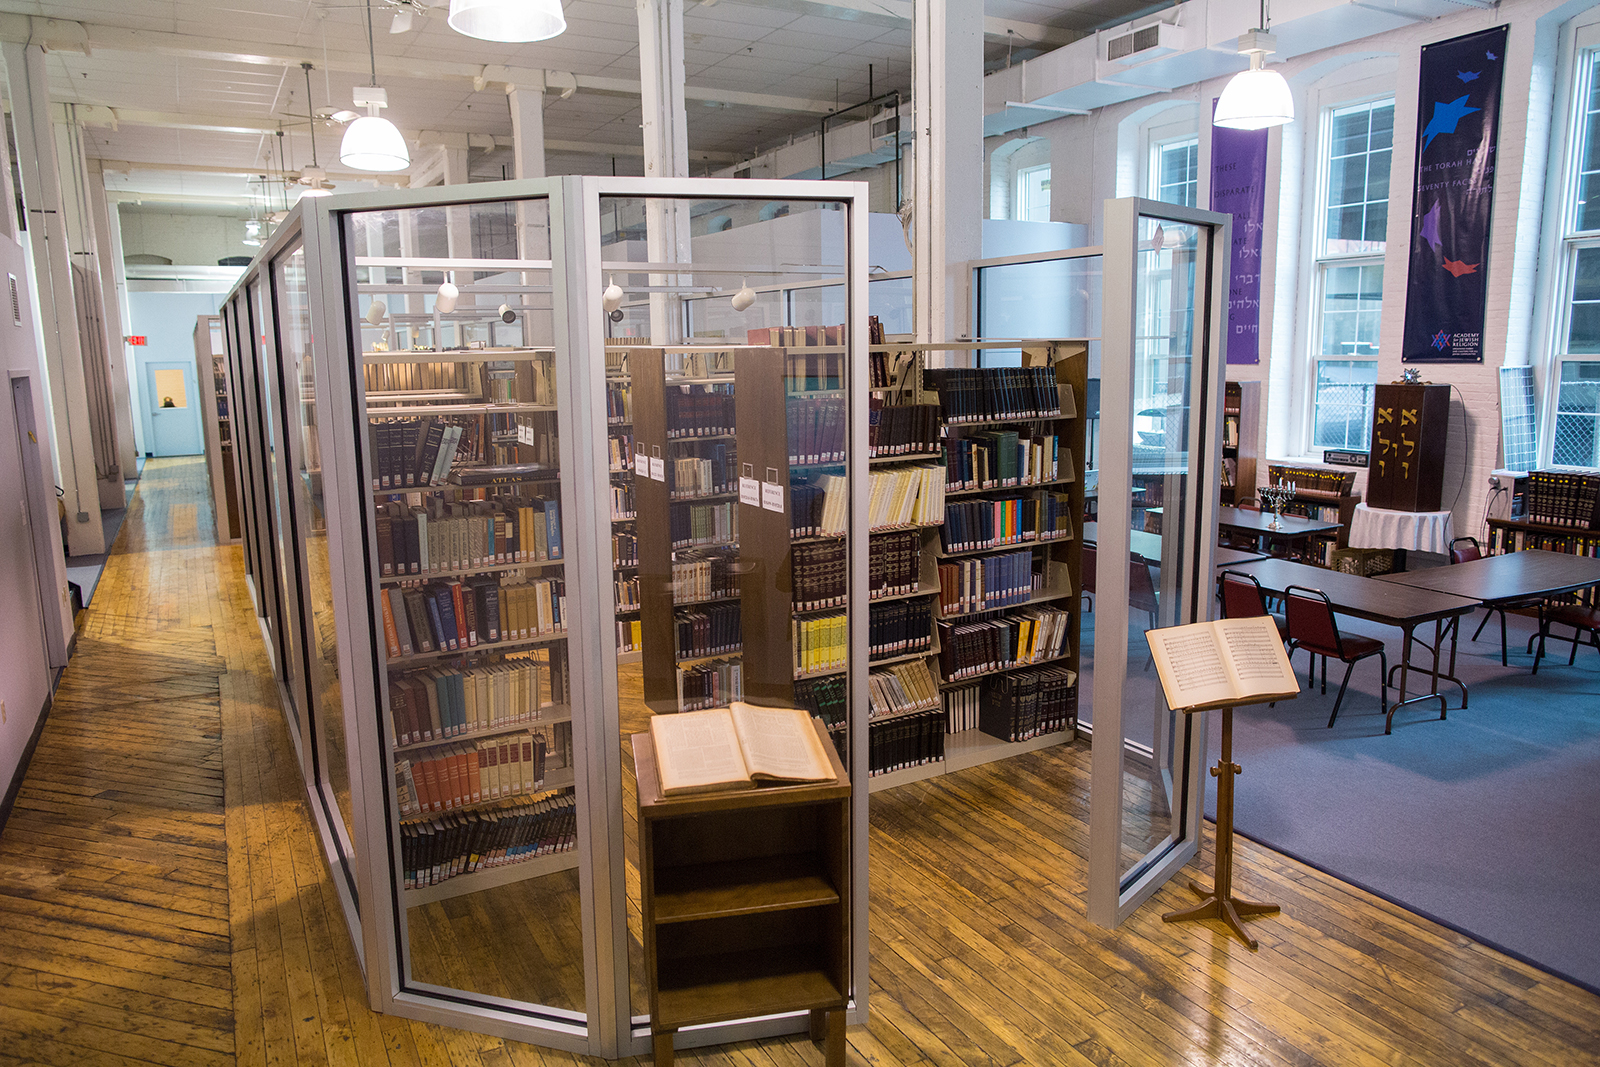 The Academy of Jewish Religion is housed in the old Otis Elevator factory building in Yonkers, New York. It features a glass enclosed library. Photo courtesy of AJR